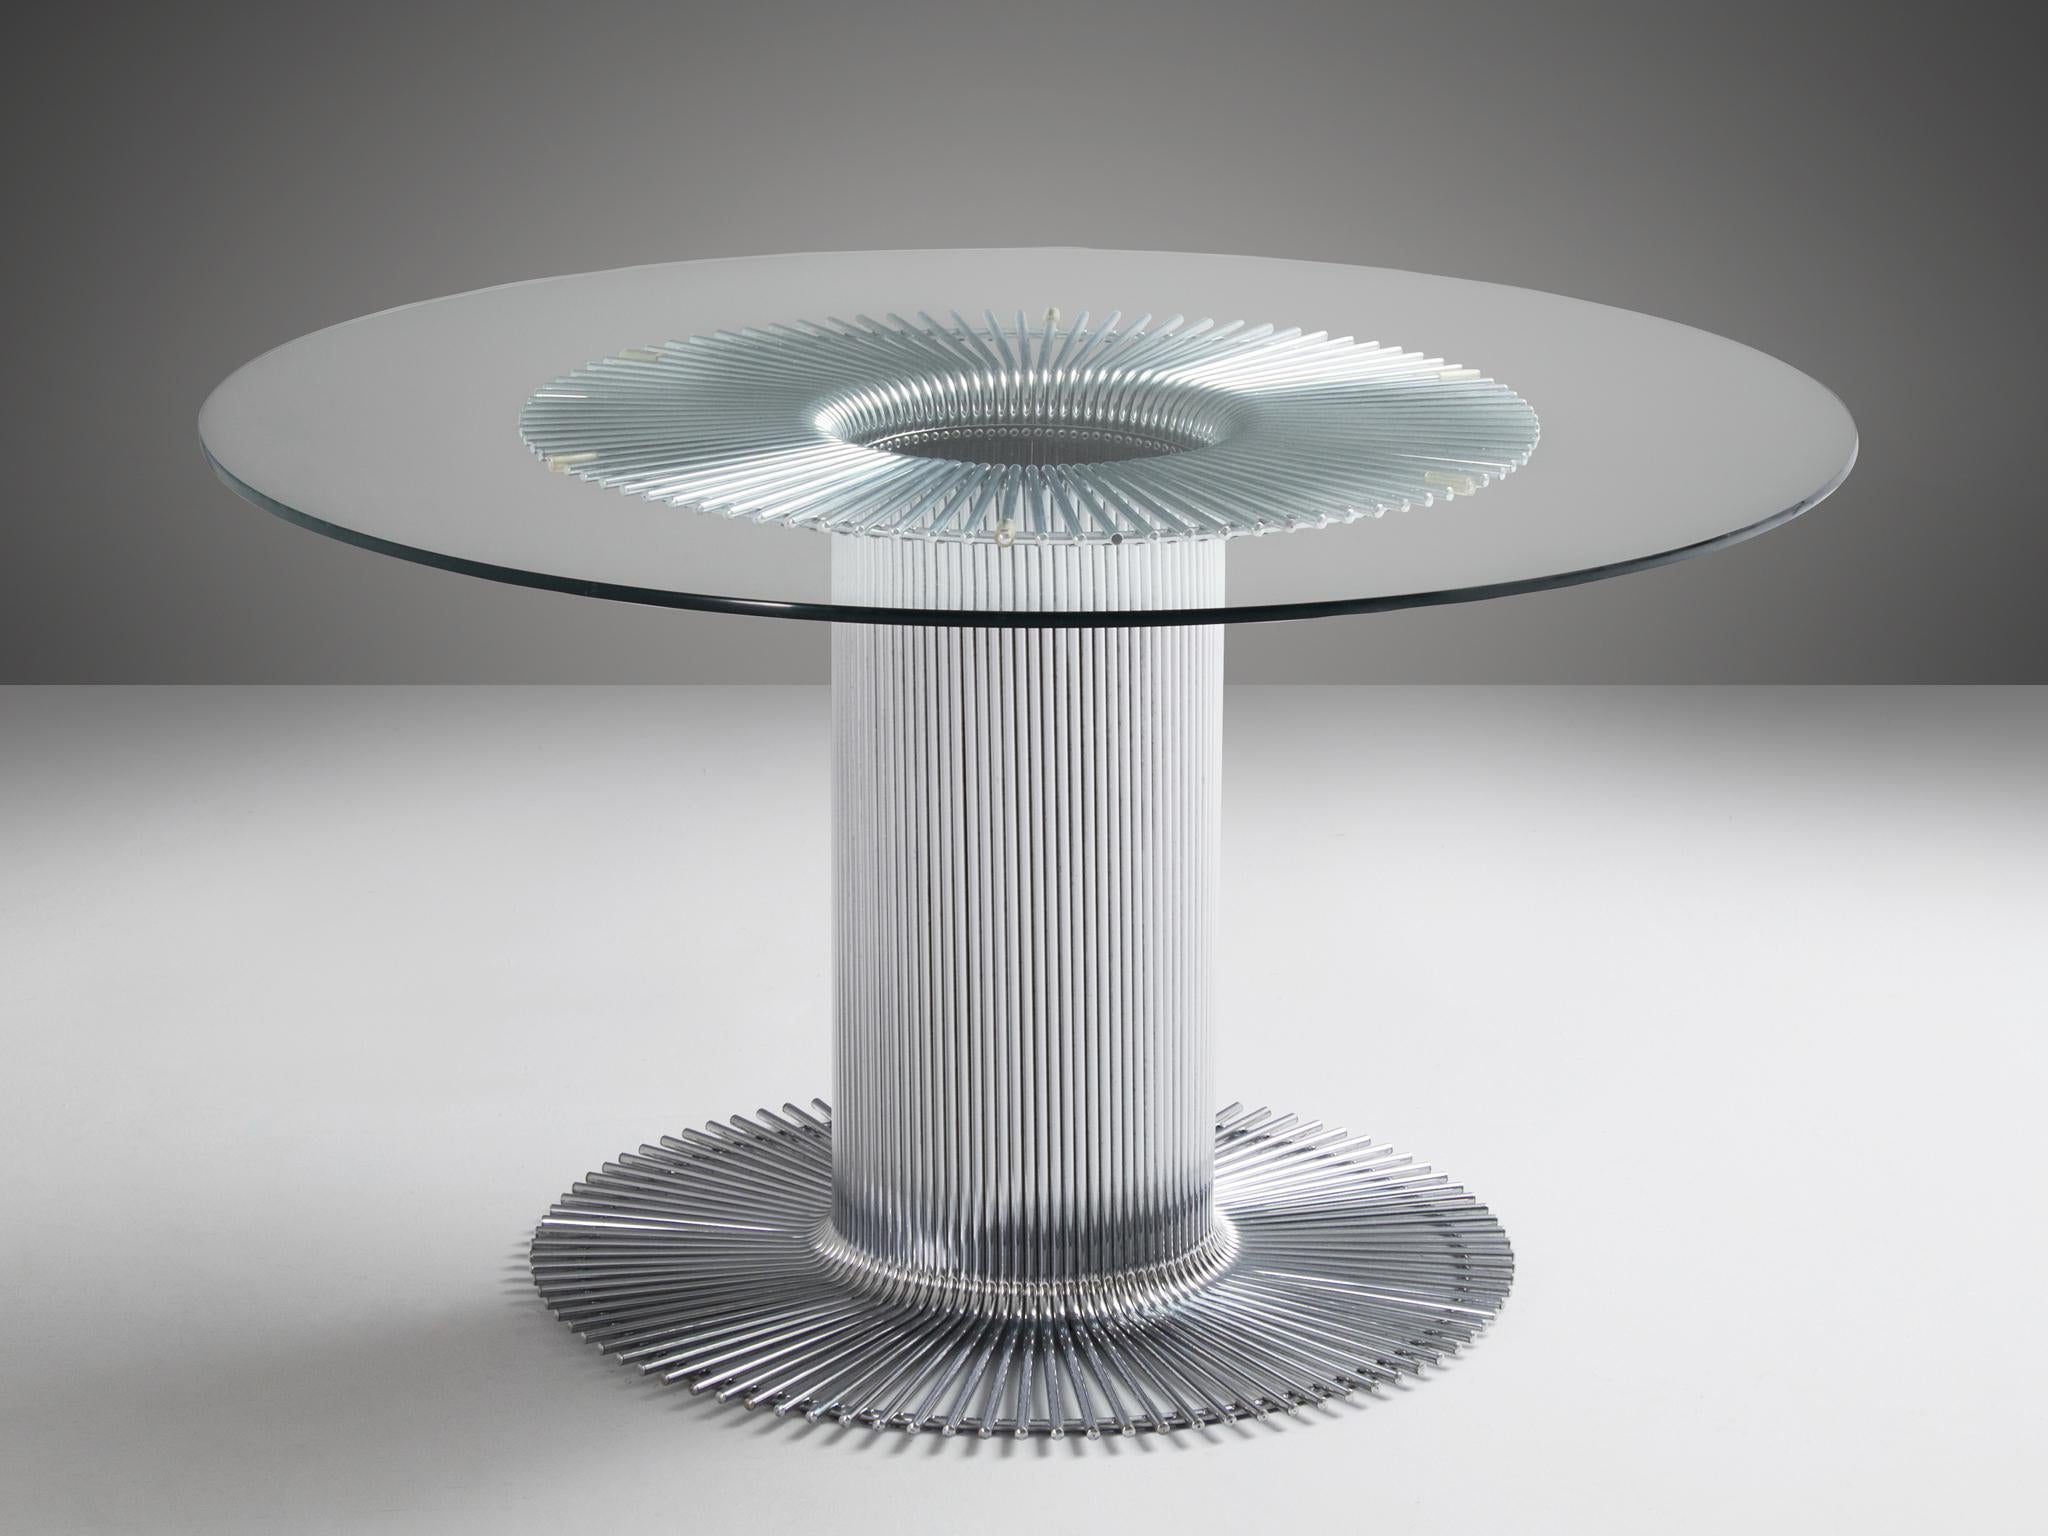 Round dining table, chromed metal, glass, Italy, 1960s 

Pedestal dining table with a sculptural tubular chrome base and clear glass top. Designed in Italy. Distinguished design of the central base, with a beautiful visual effect due to the